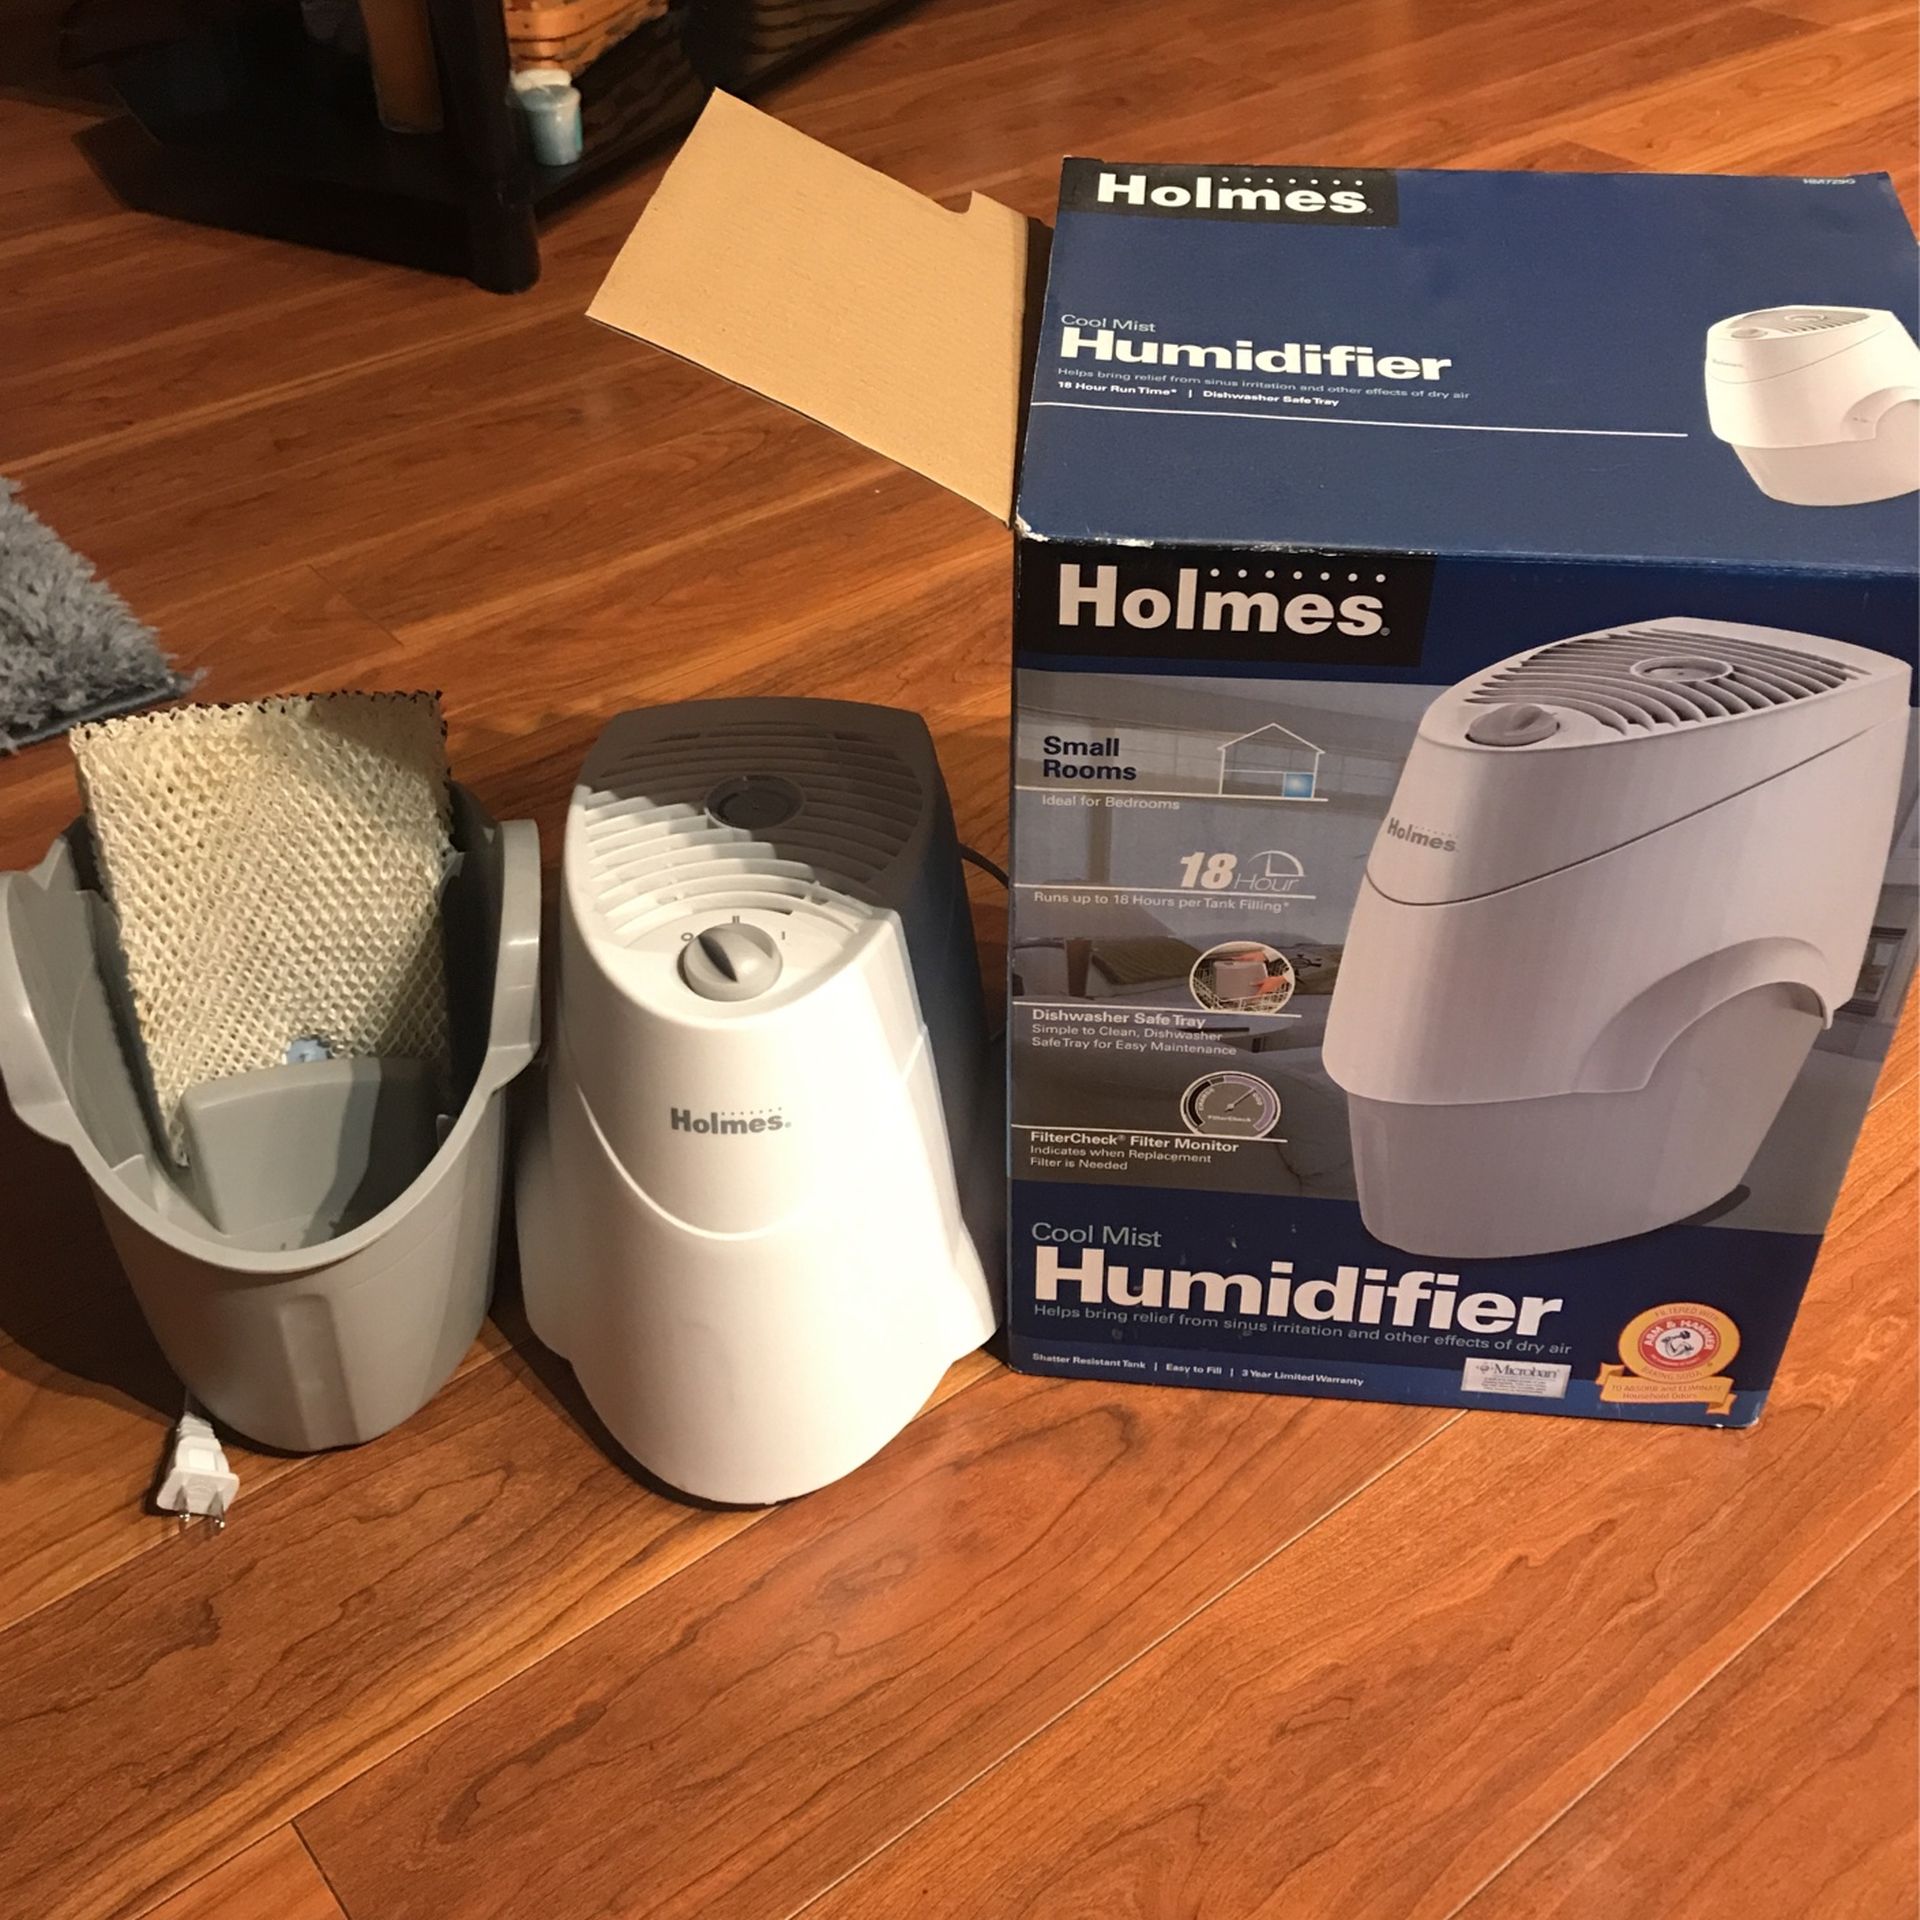 Holmes Cool Mist Humidifier 